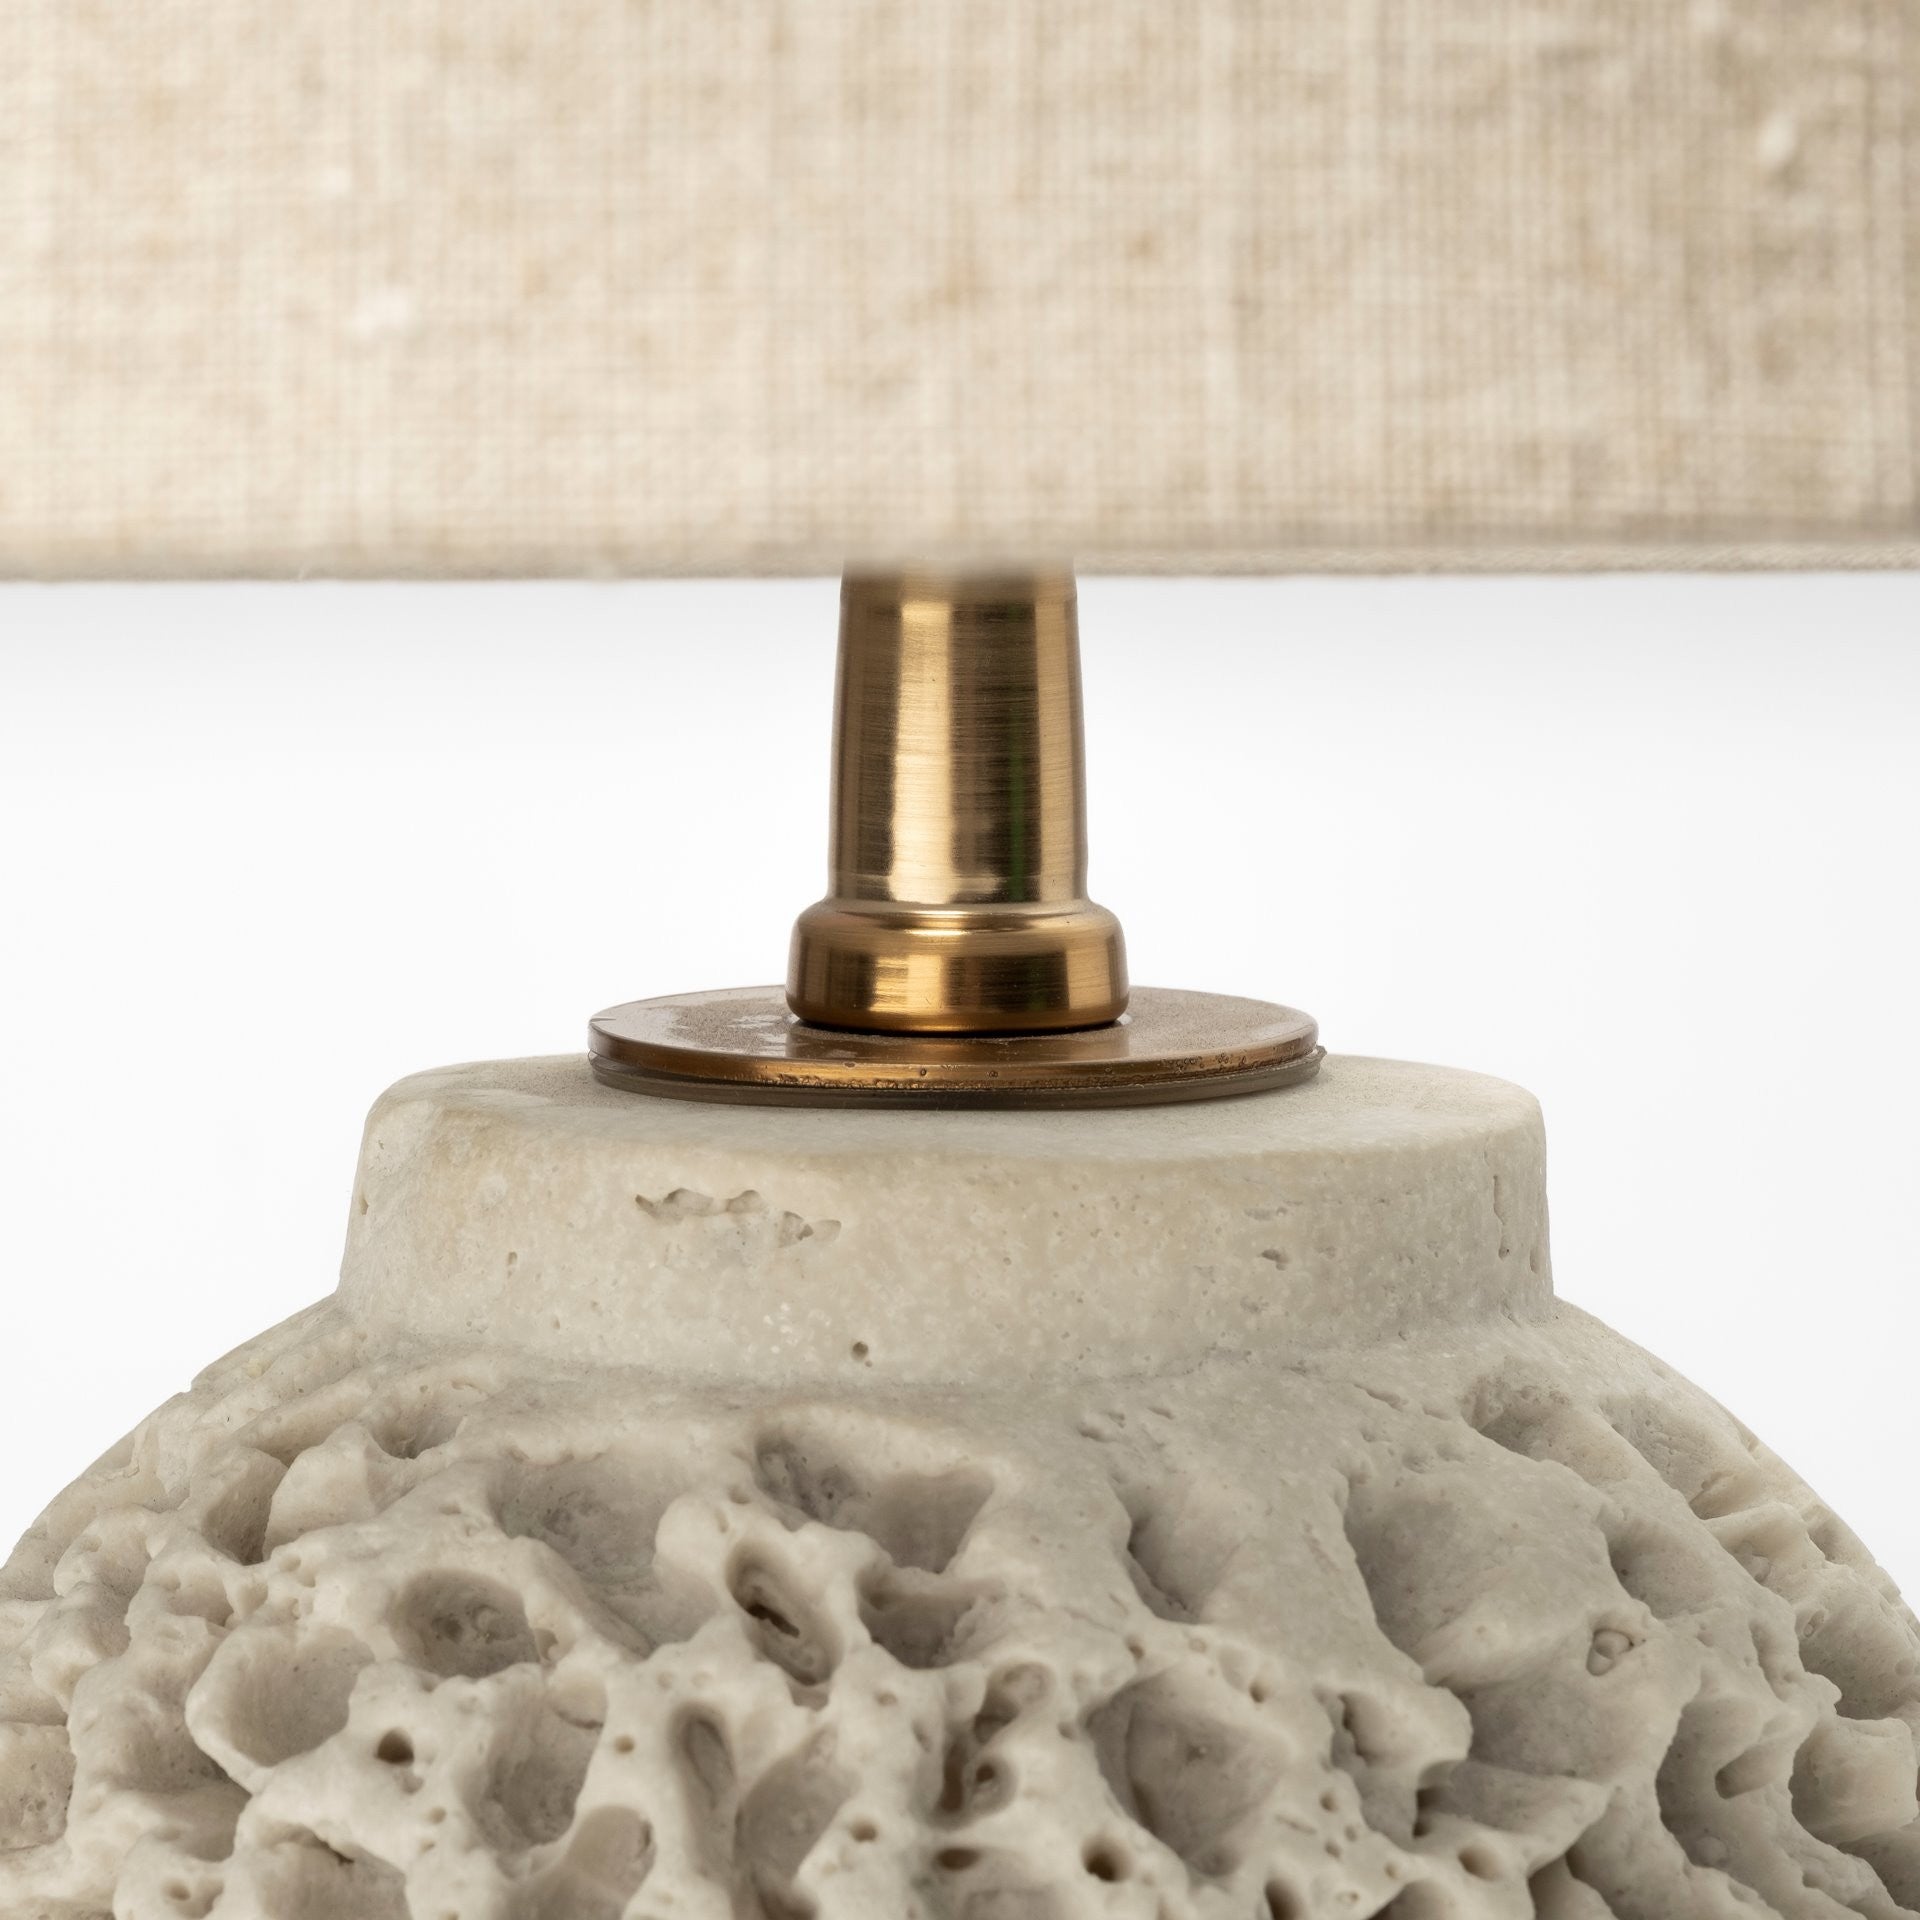 26" Beige Lamp Base LED With Champagne Shade